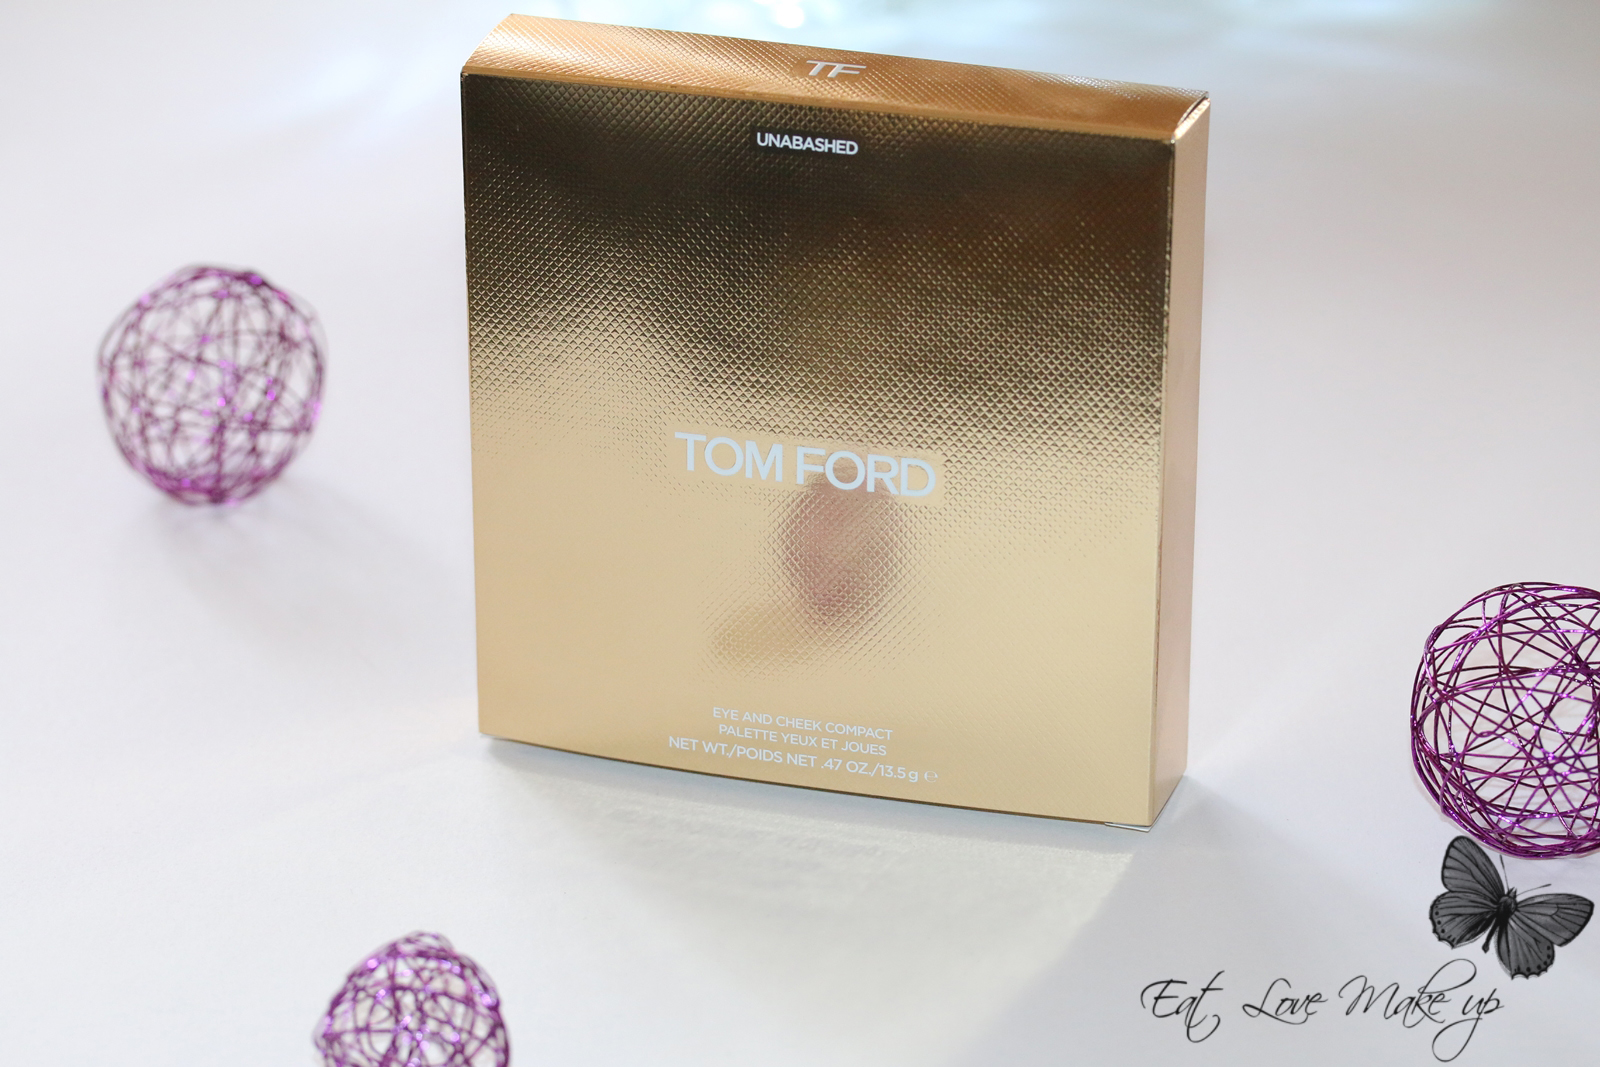 Tom Ford Unabashed Eye And Cheek Compact